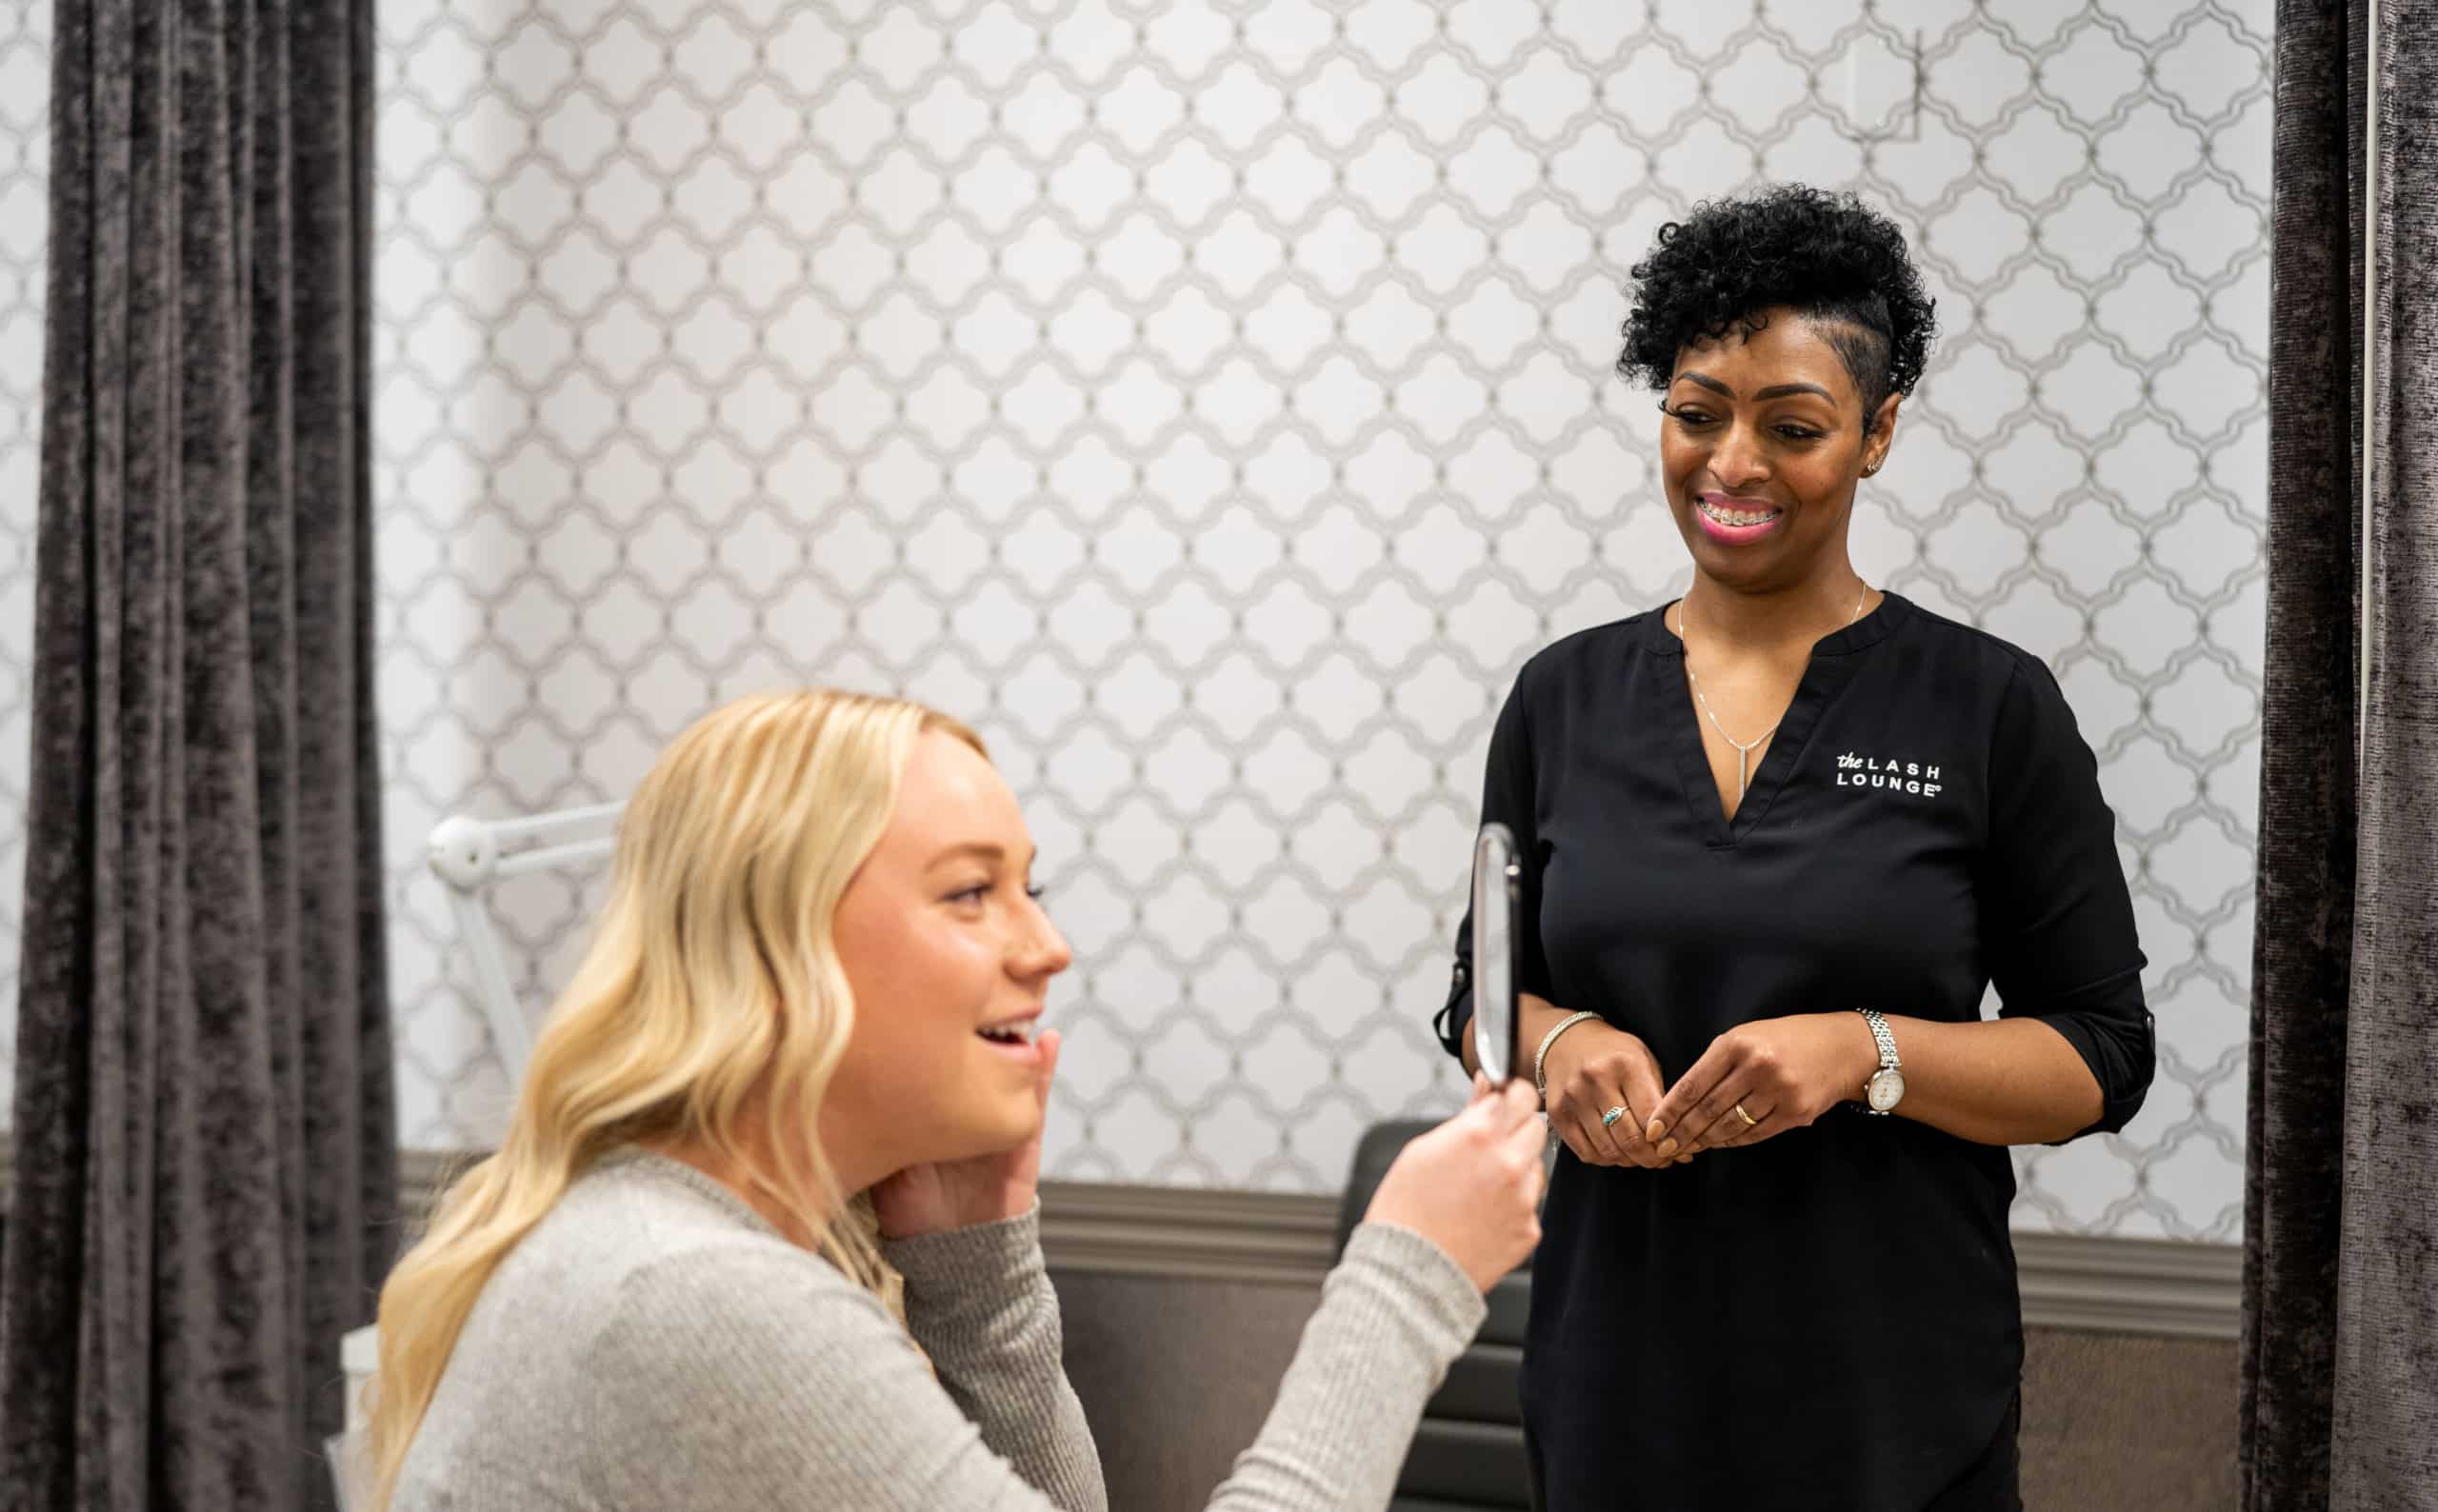 An lash technician from The Lash Lounge smiles as a guest admires her new lashes